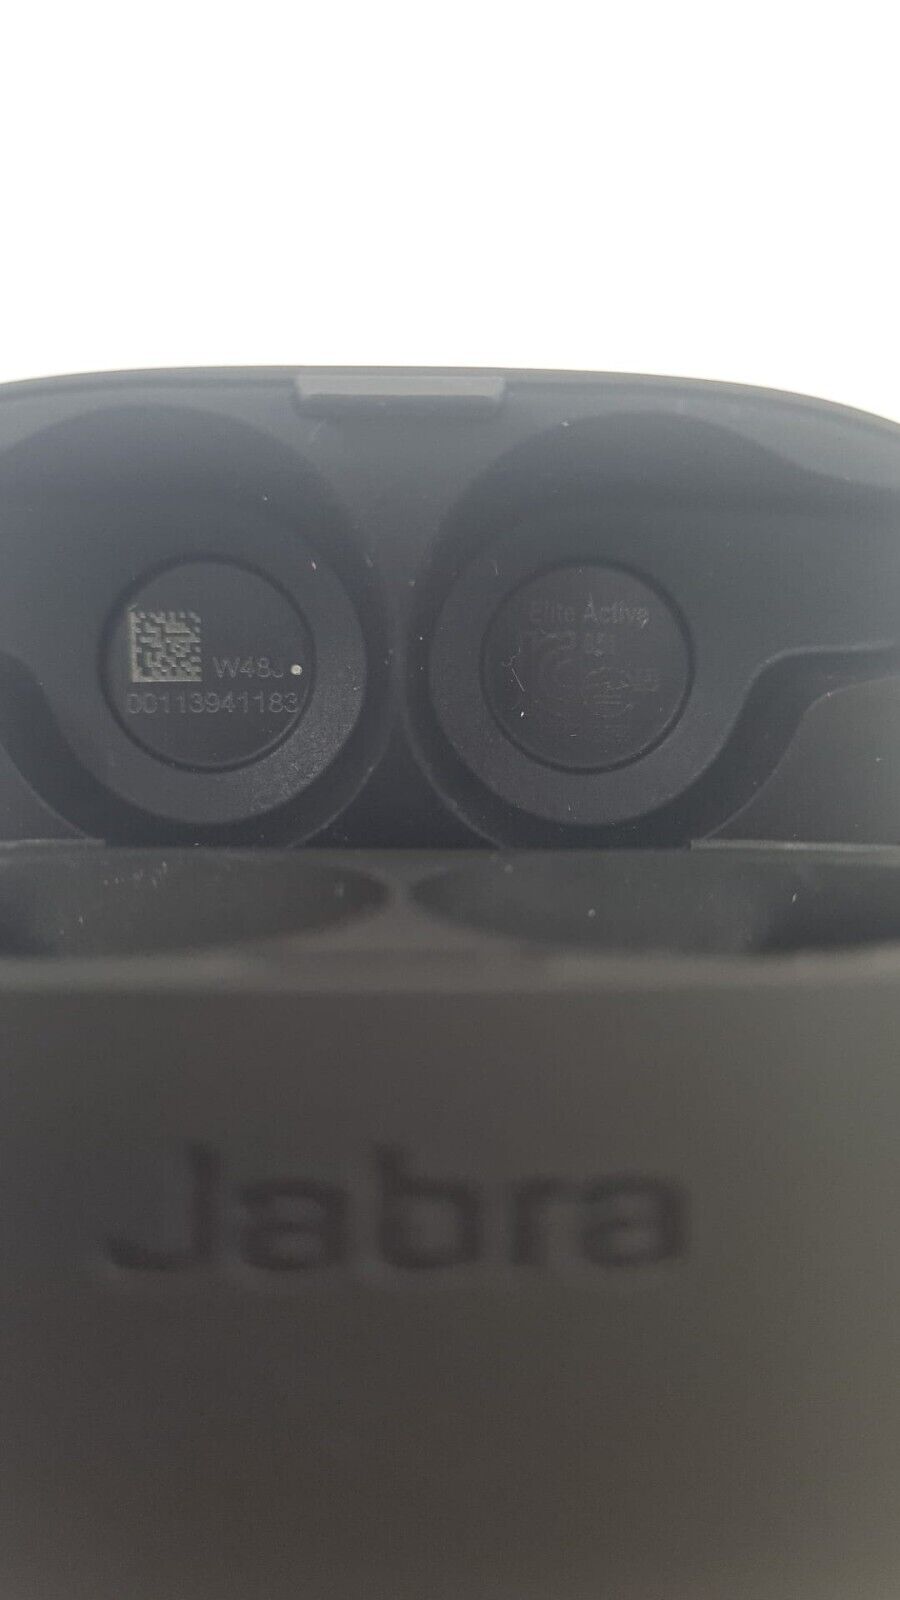 Jabra Elite Active 65t Charging Case Only For Wireless Earbuds - Black